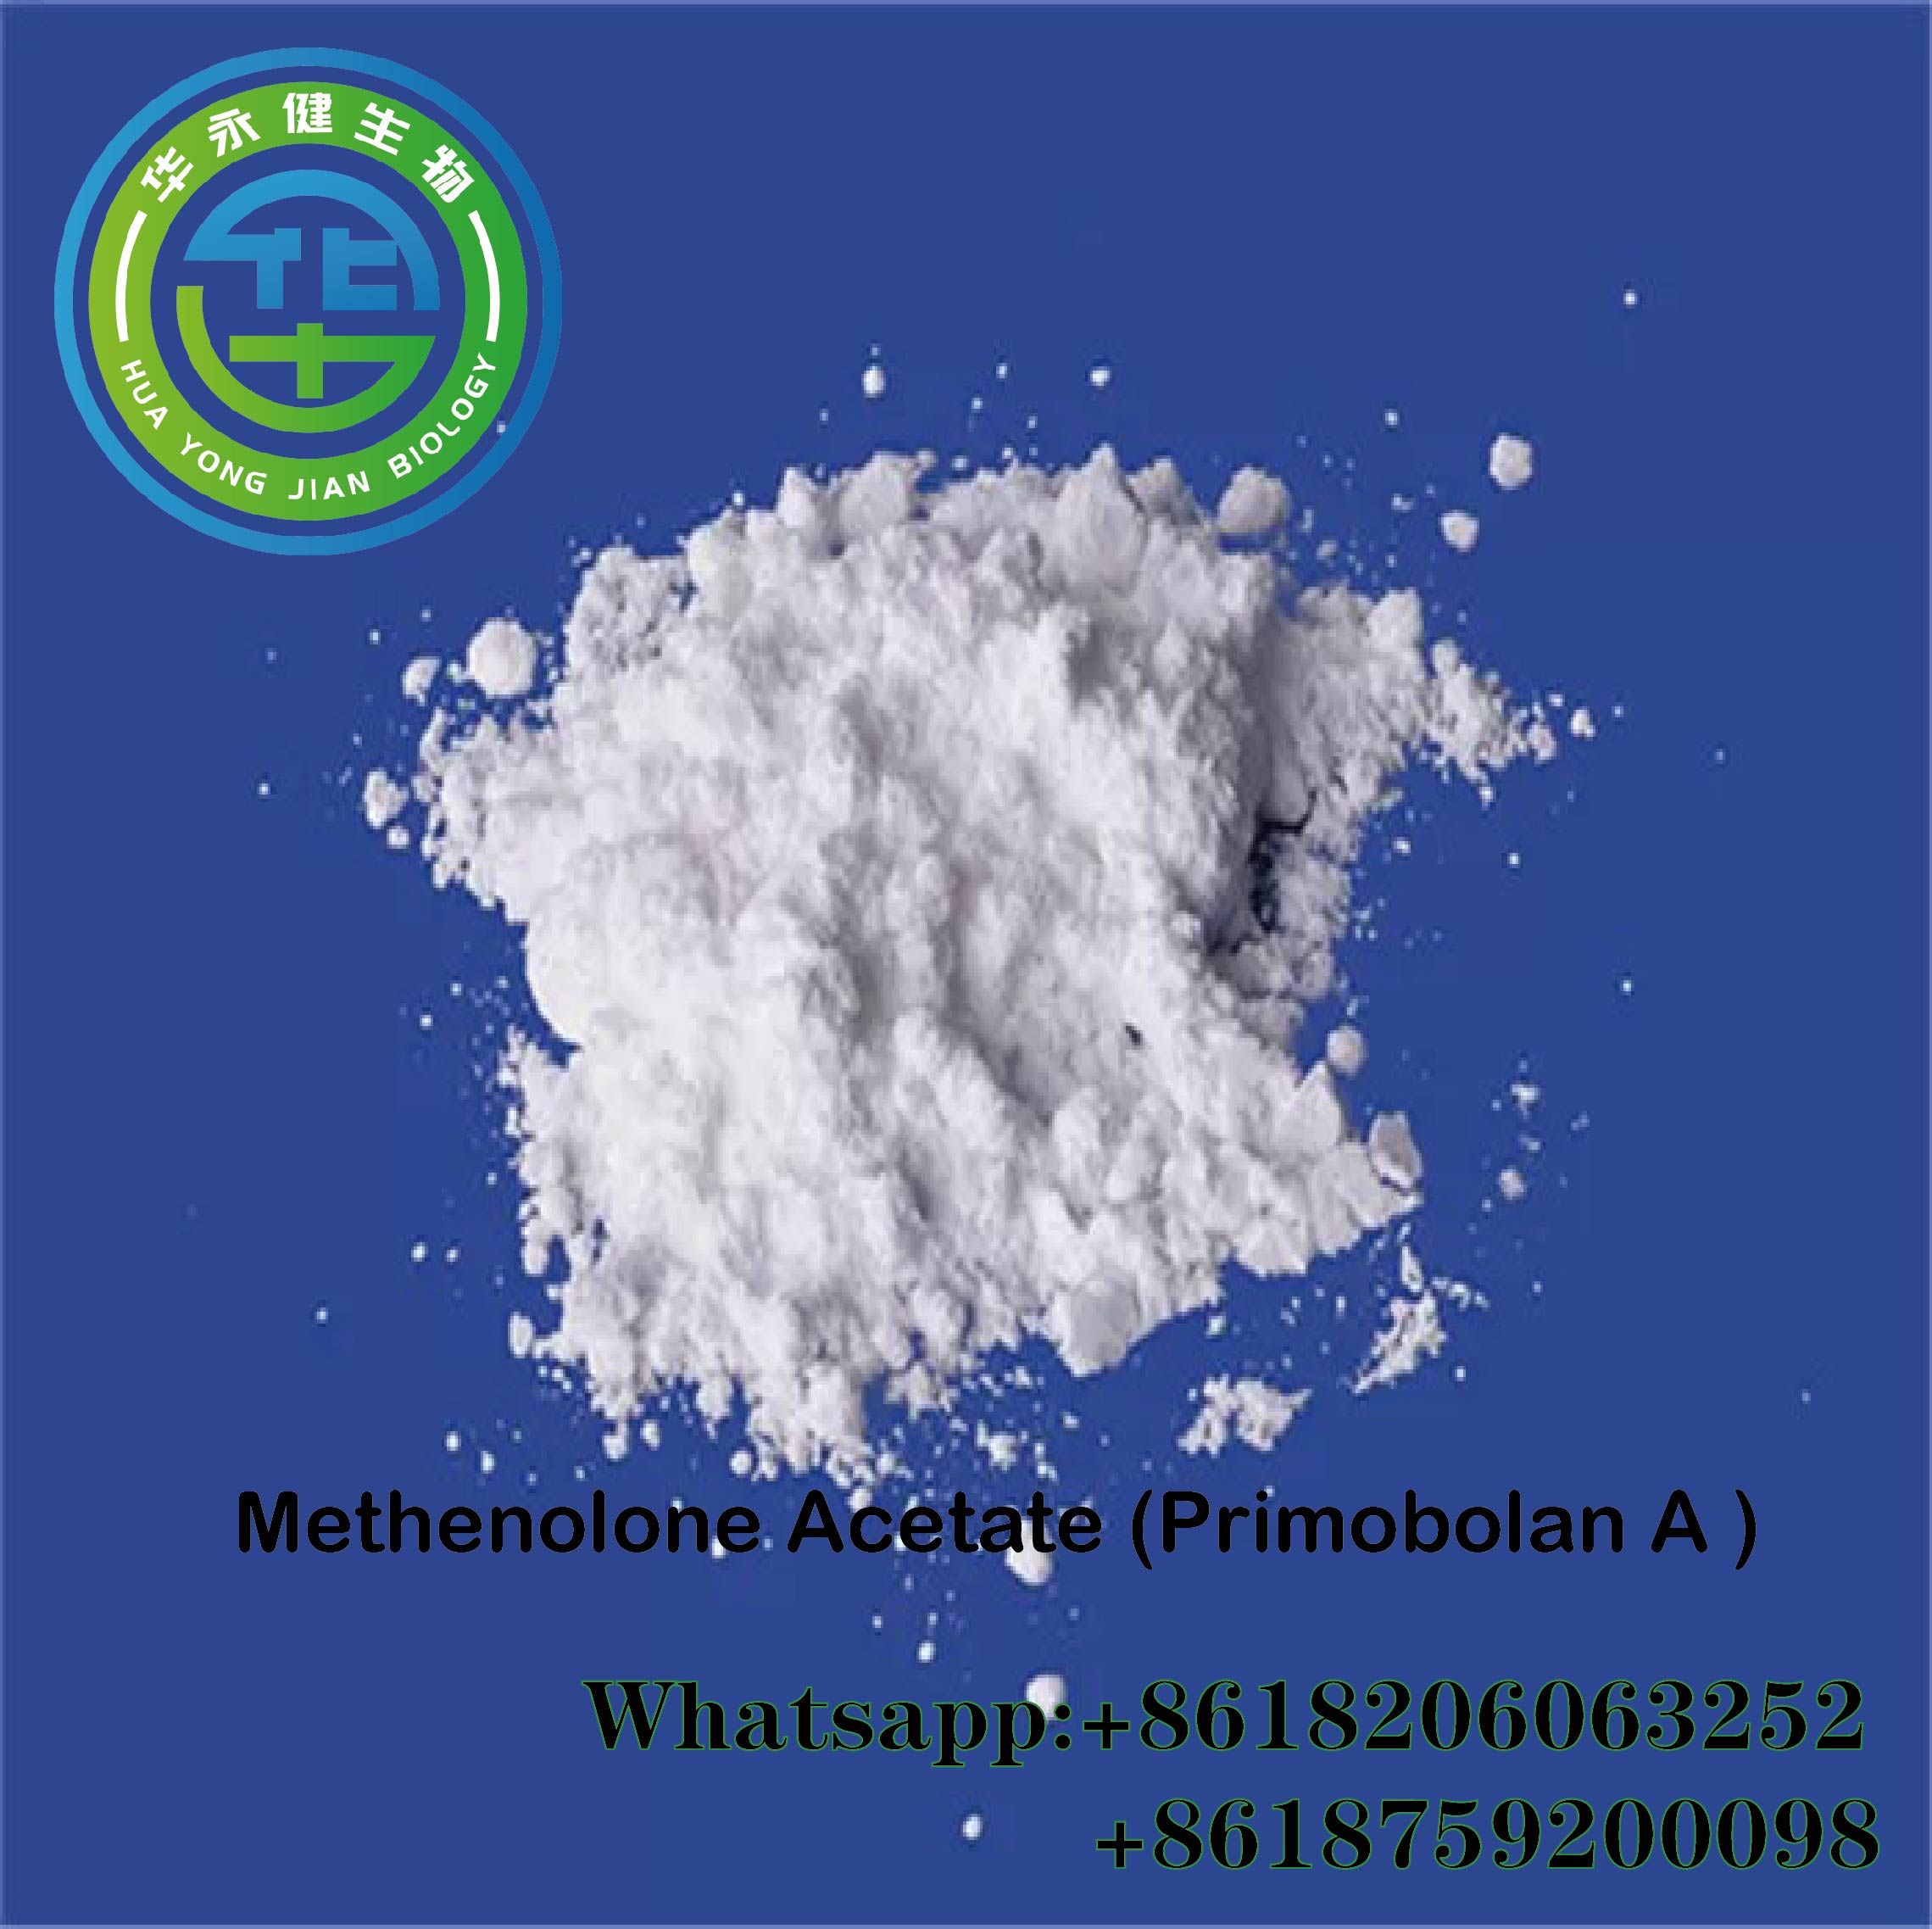 Loss of bone density Primobolan A Legal Athletes Deca Durabolin Injectable Steroids Methenolone Acetate Powder CAS 434-05-9 